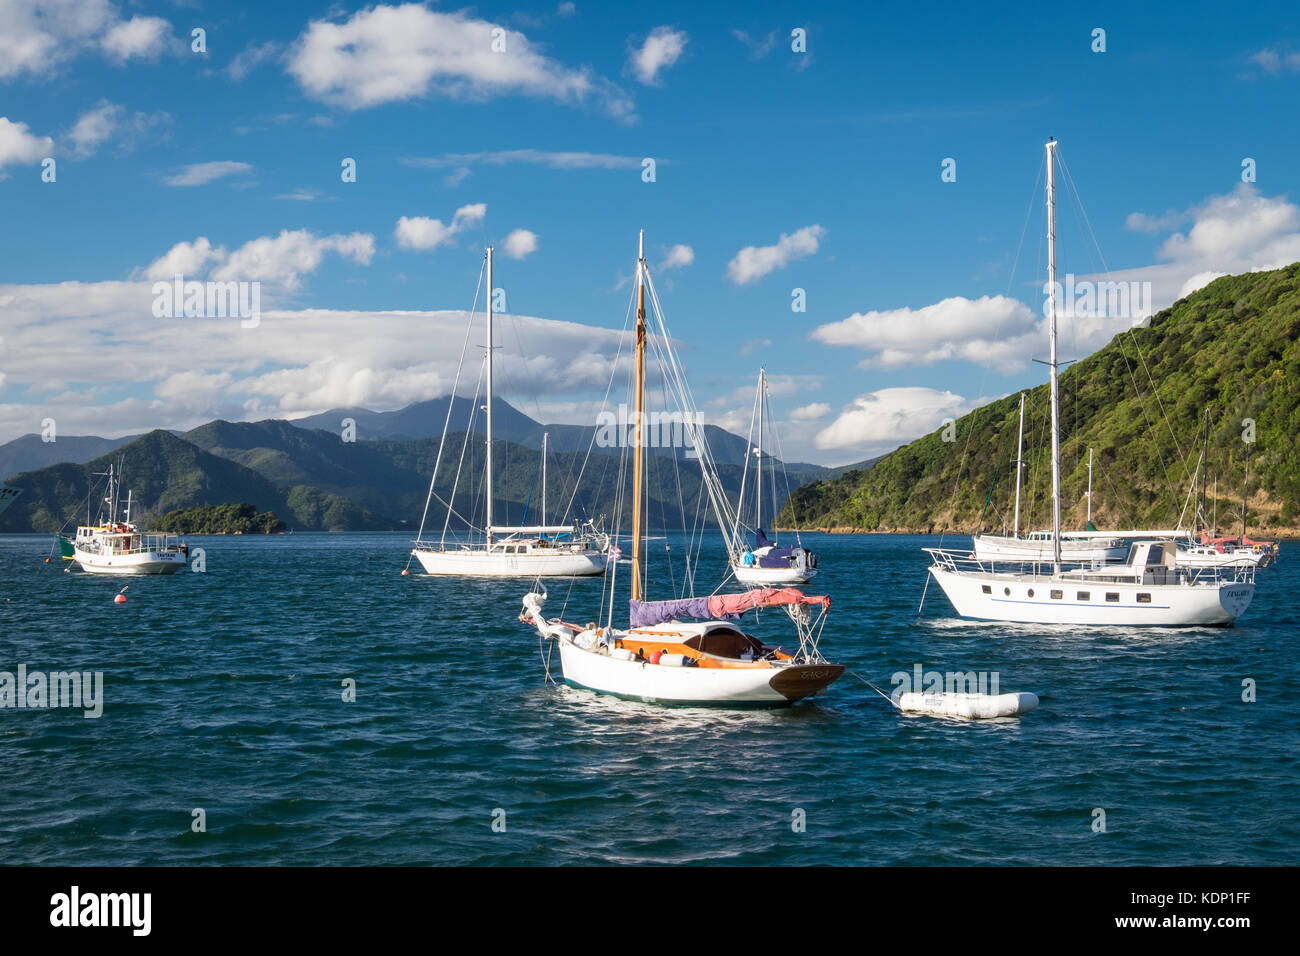 Pleasure boats moored in Picton in the Marlborough Sounds, New Zealand Stock Photo